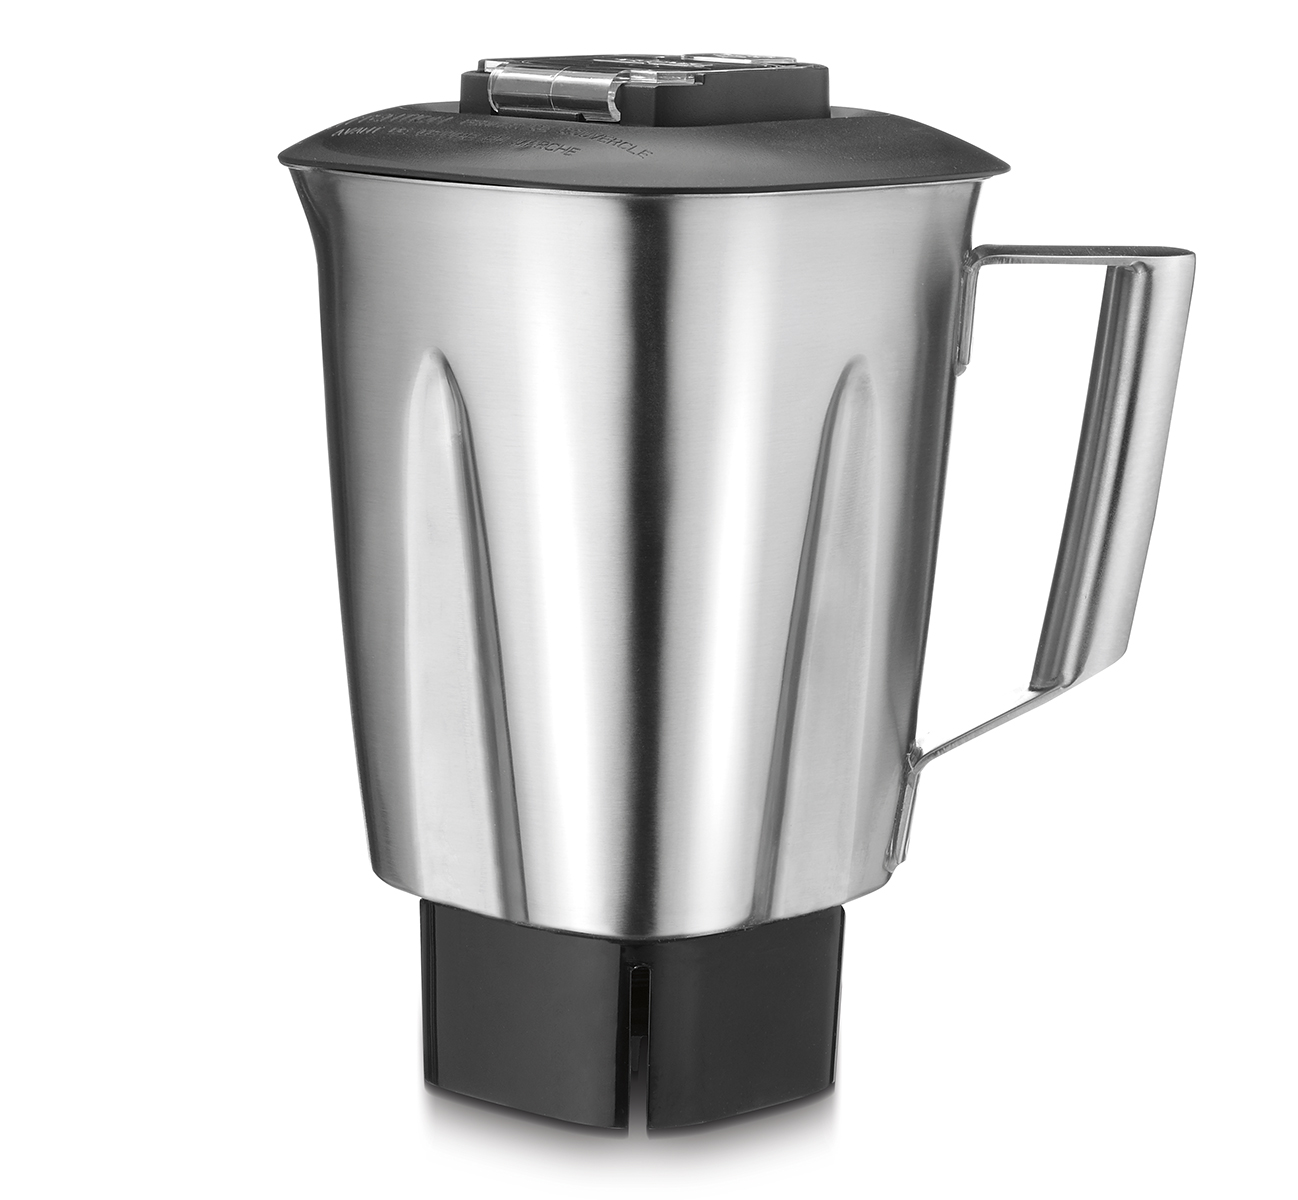 https://www.waringcommercialproducts.com/files/accessories/cac138-stainless-steel-blender-container.jpg